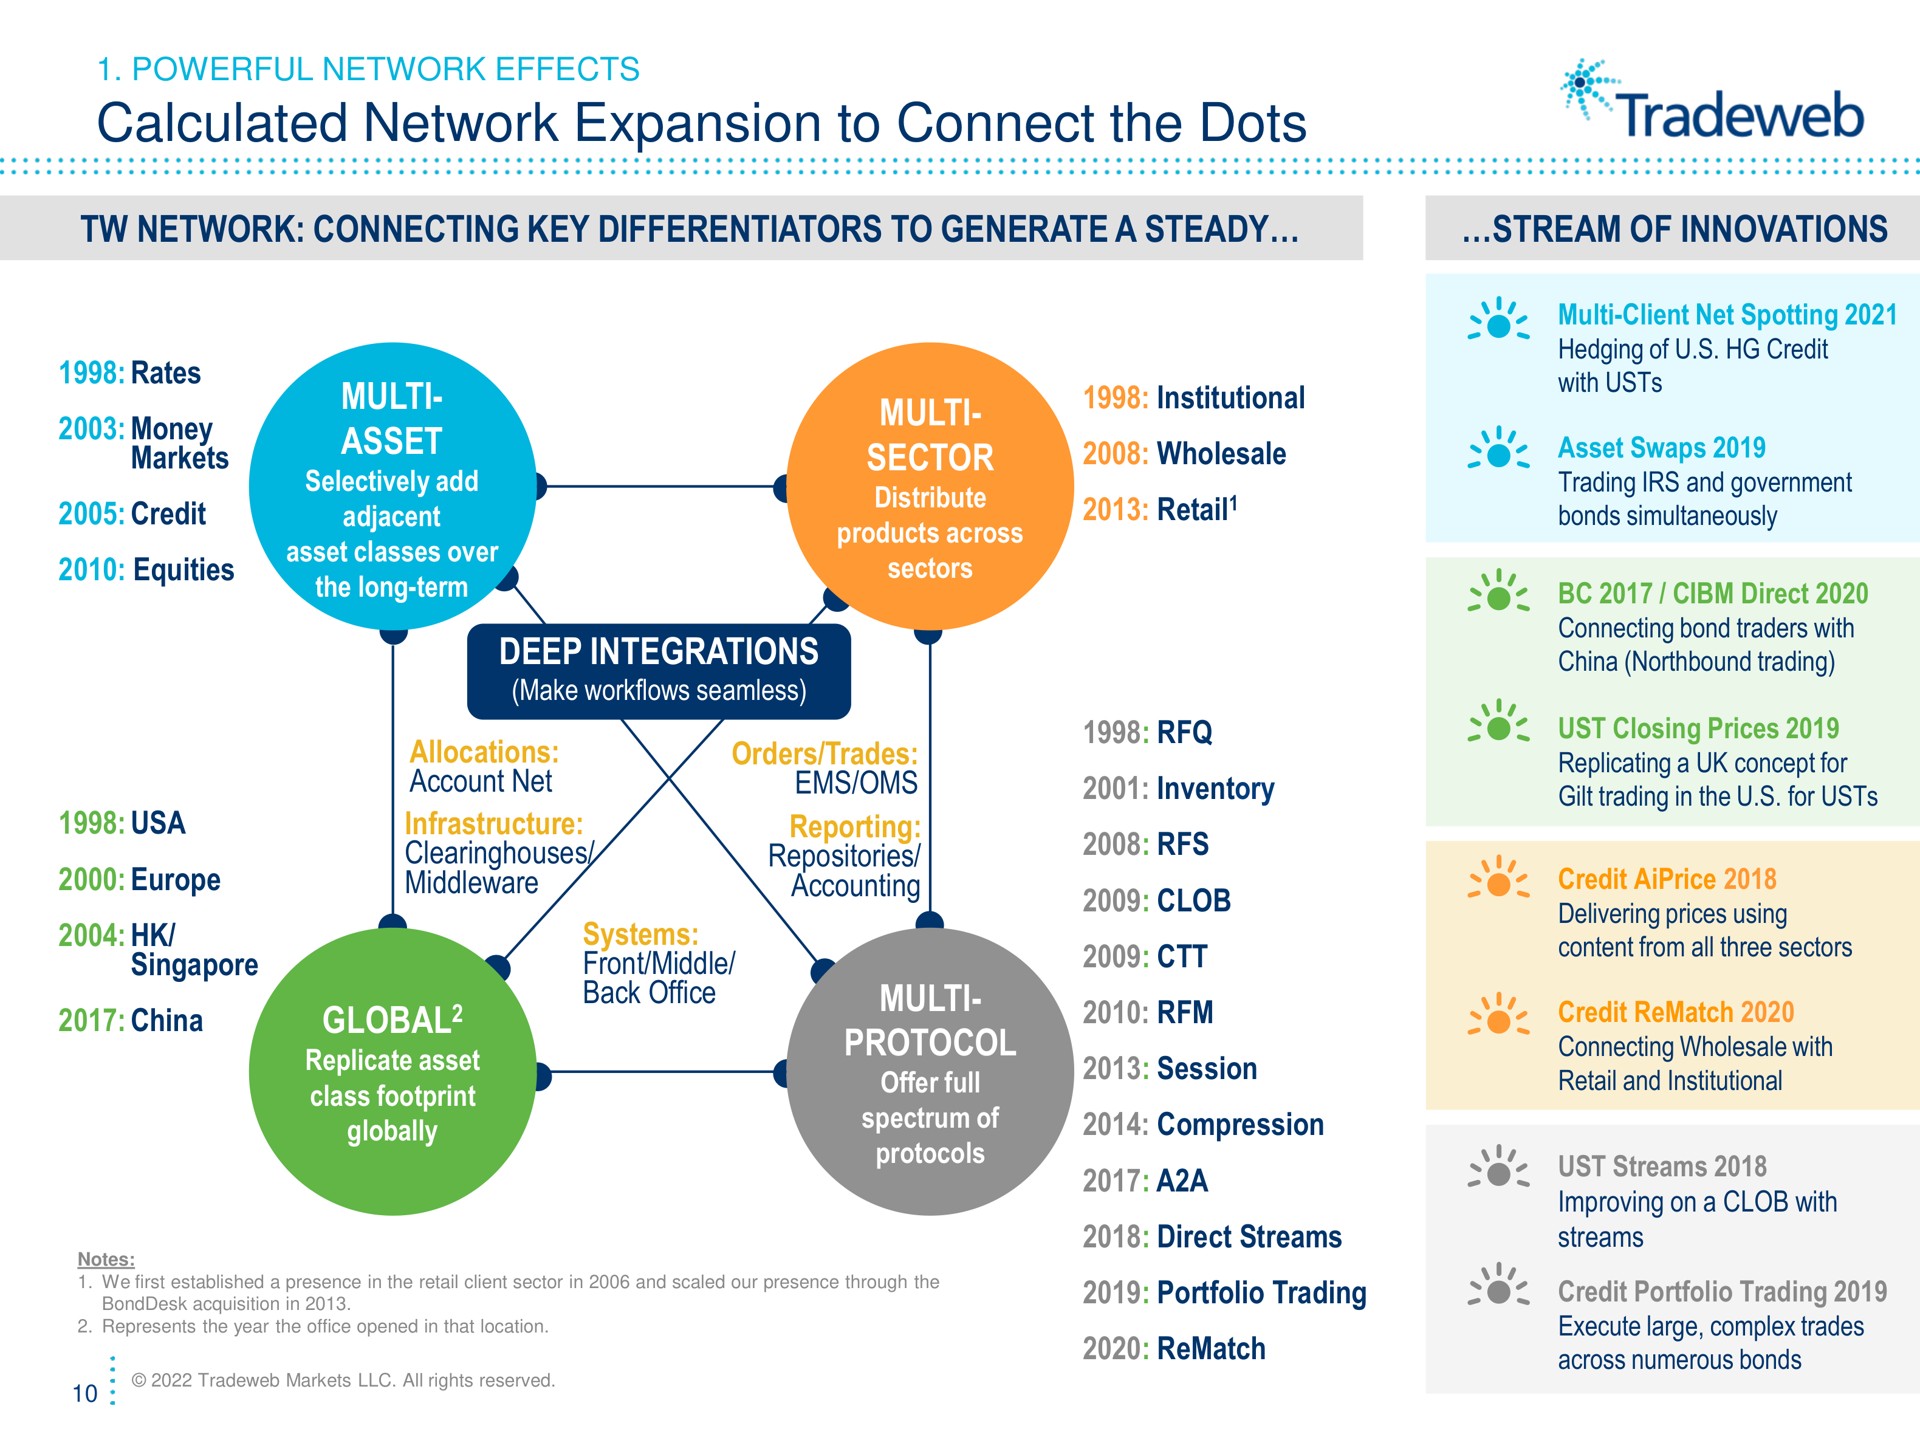 calculated network expansion to connect the dots network connecting key differentiators to generate a steady stream of innovations asset sector deep integrations global protocol powerful effects rates credit me equities markets selectively add classes over allocations account net infrastructure make seamless reporting repositories accounting inventory wholesale retail peak sectors systems front middle office session china global replicate class footprint globally notes rematch protocols compression a a direct streams client net spotting hedging credit with swaps trading and government bonds simultaneously direct bond traders with china northbound trading ust closing prices replicating concept for gilt trading in for delivering prices using wholesale with improving on with credit portfolio trading execute large complex trades across numerous bonds | Tradeweb